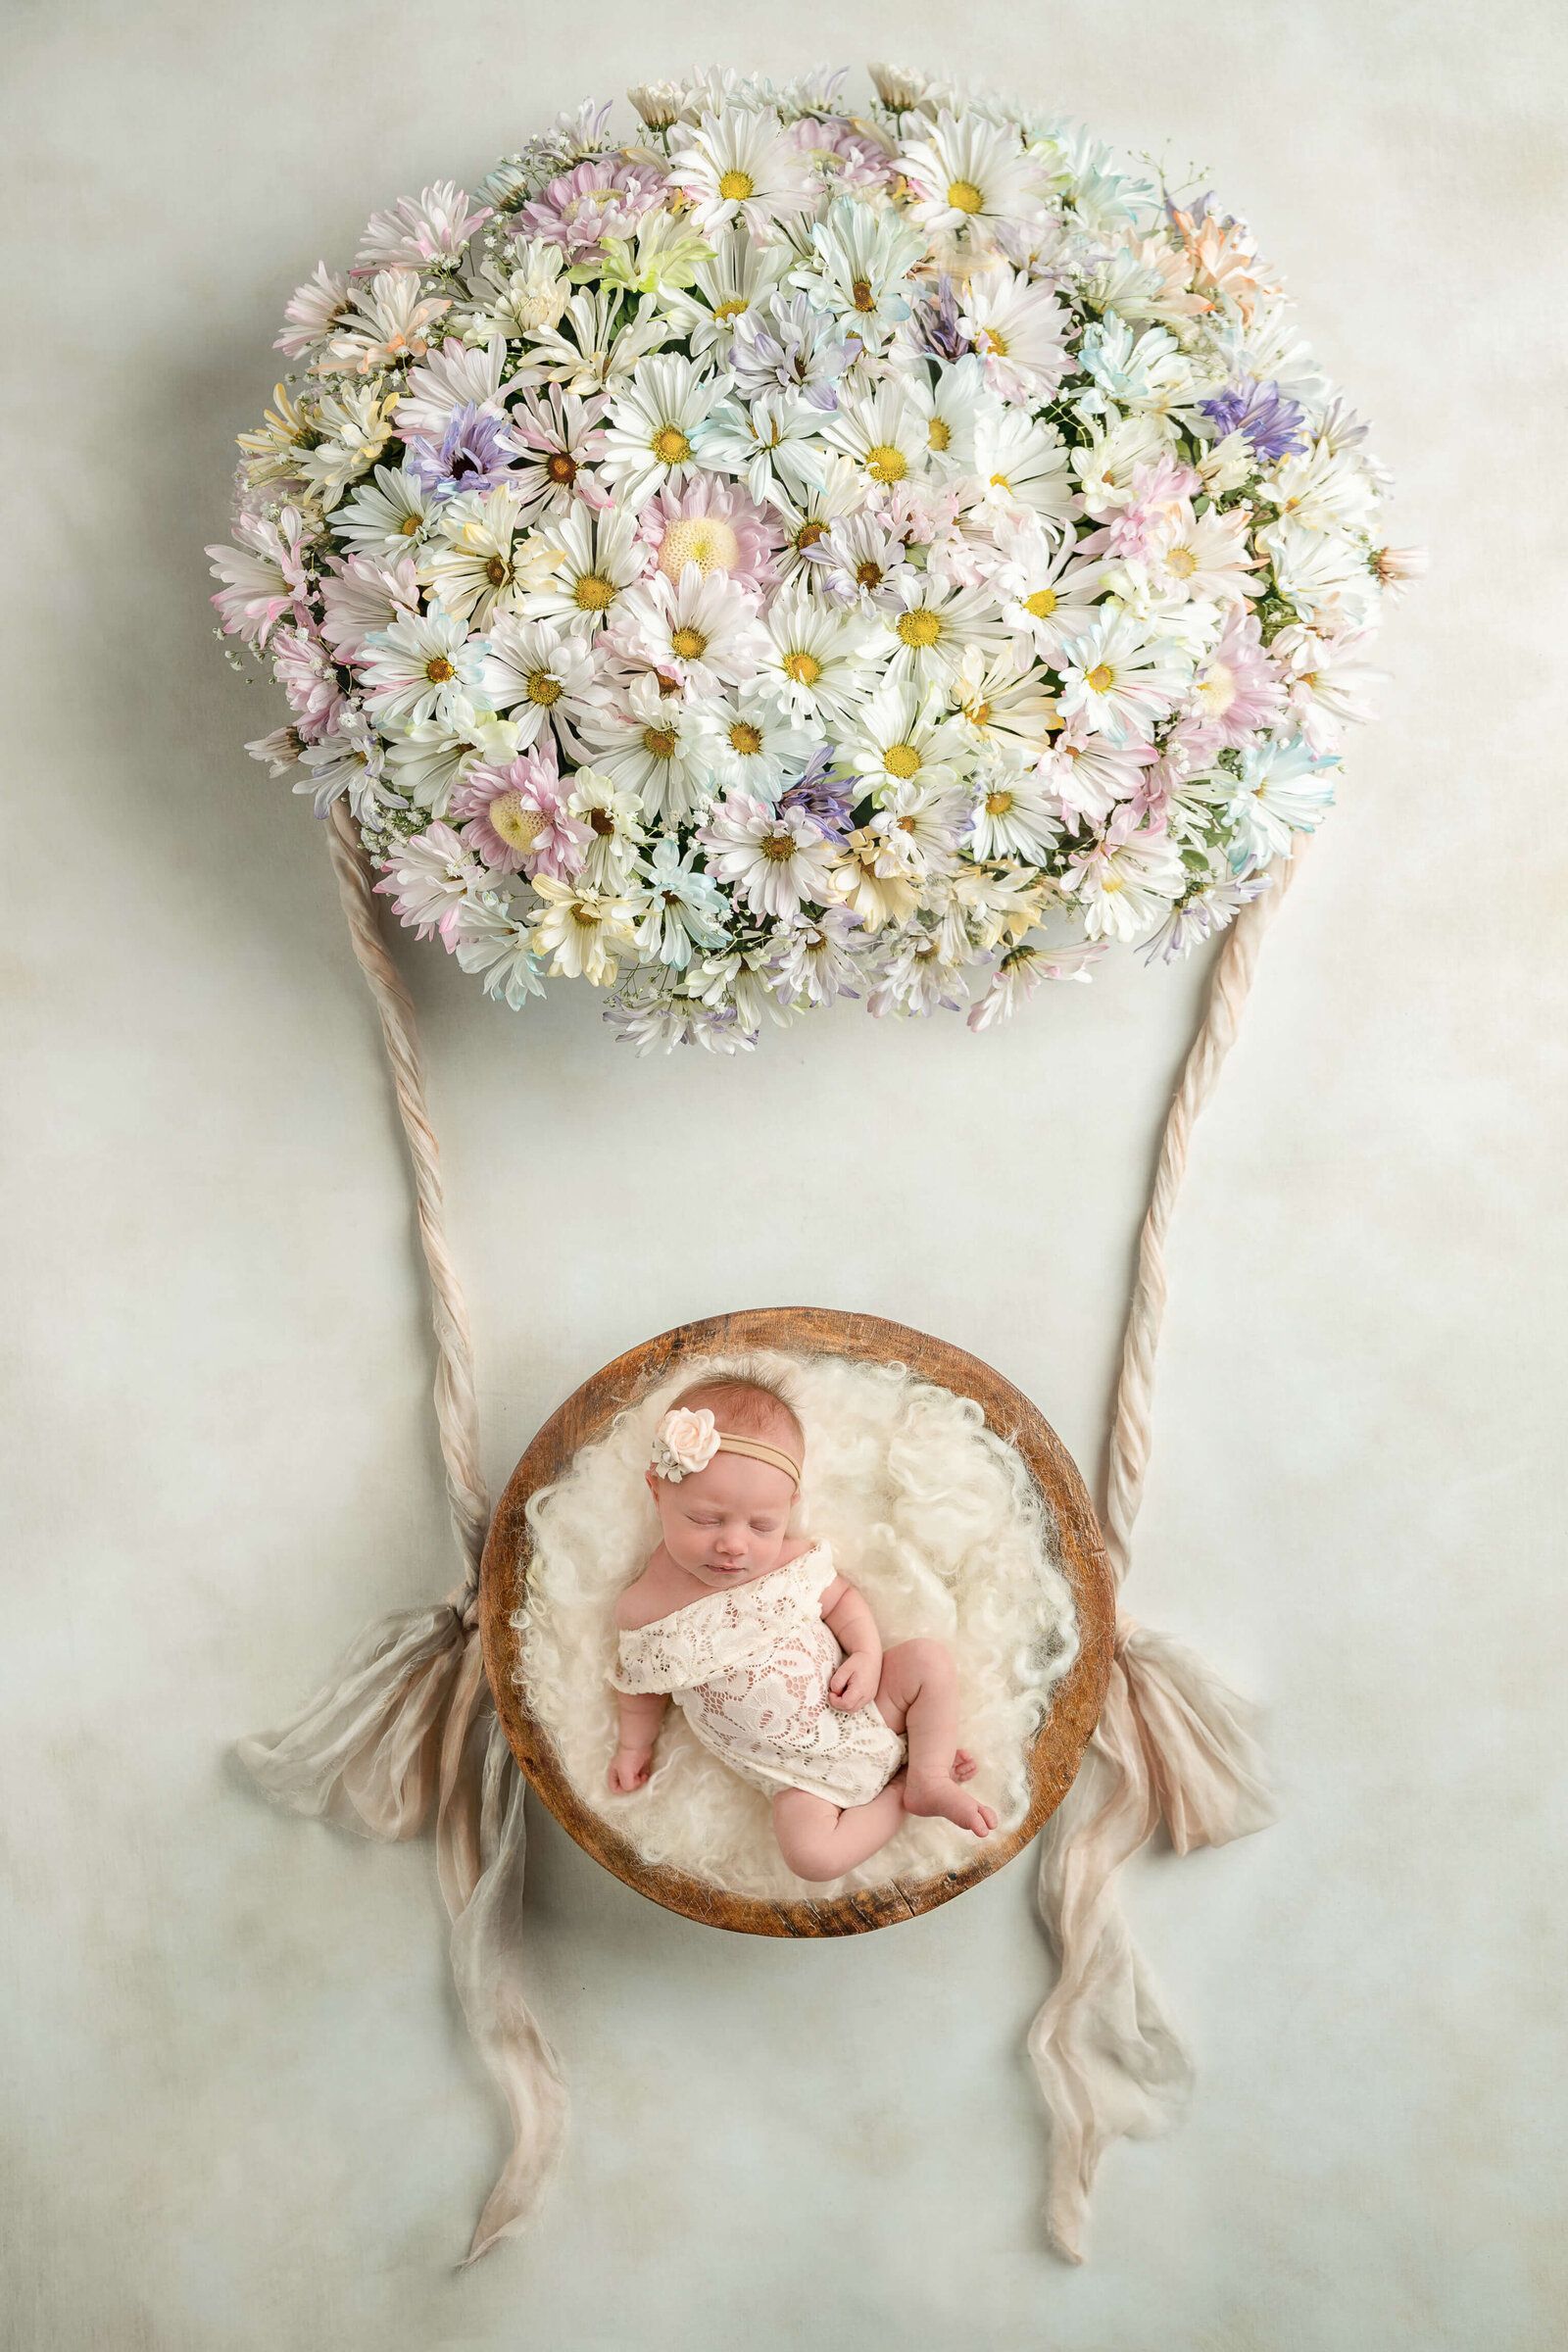 Newborn in lace outfit sleeping in a hot air balloon with a flower headband at Jen Sabatini Photography